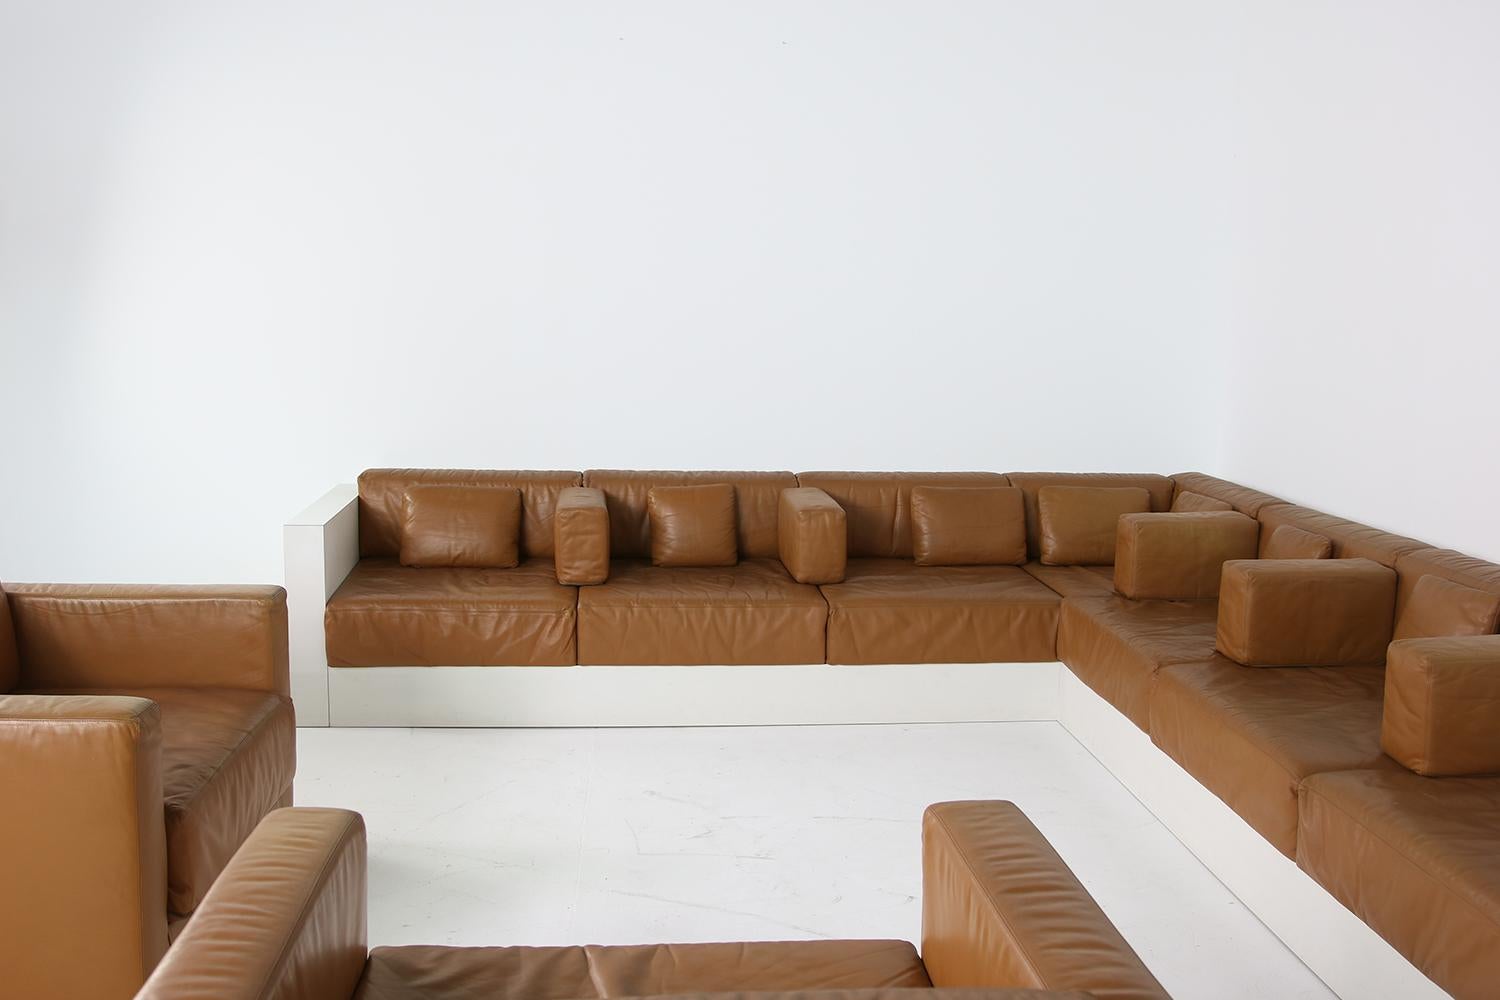 Unique & Large 1960s Landscape Sofa & Chairs Brown Leather Made to Order 1969 For Sale 6